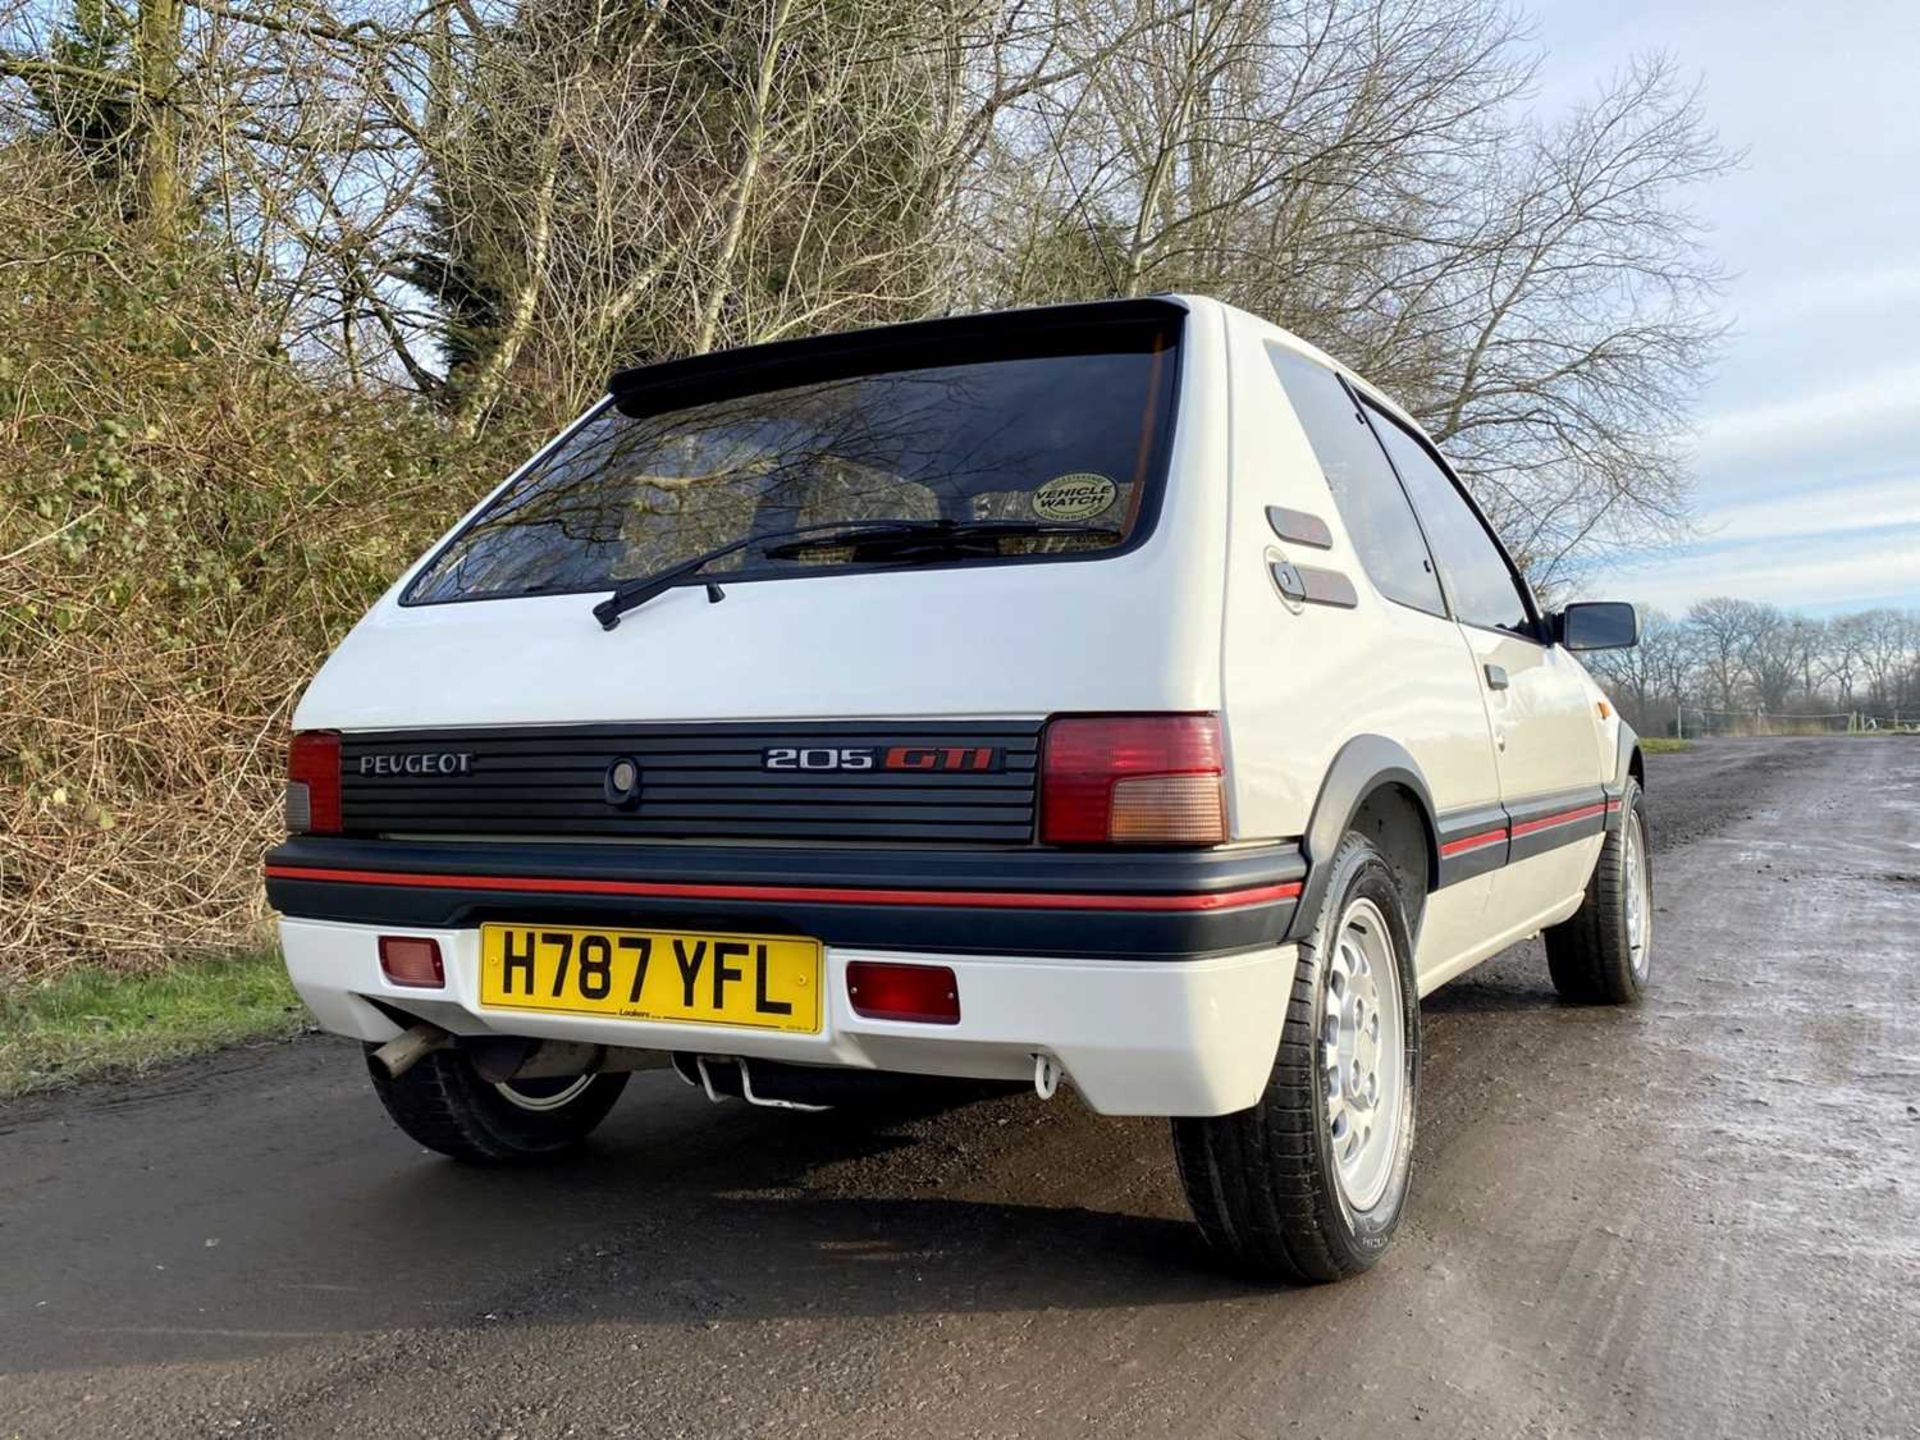 1990 Peugeot 205 GTi 1.6 Only 56,000 miles, same owner for 16 years - Image 23 of 81